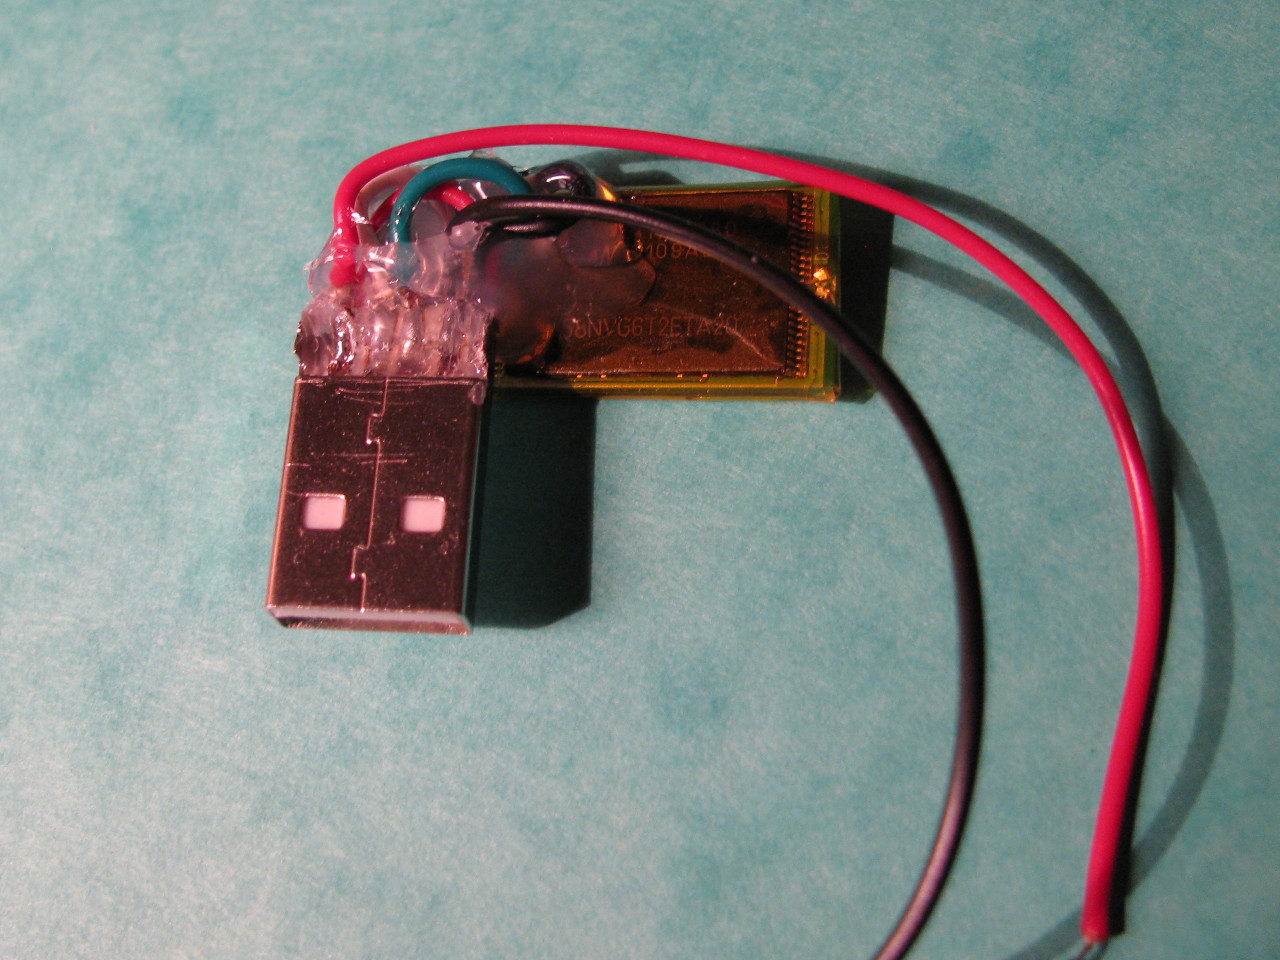 05_USB_flash_disk_with_new_USB_connector.jpg